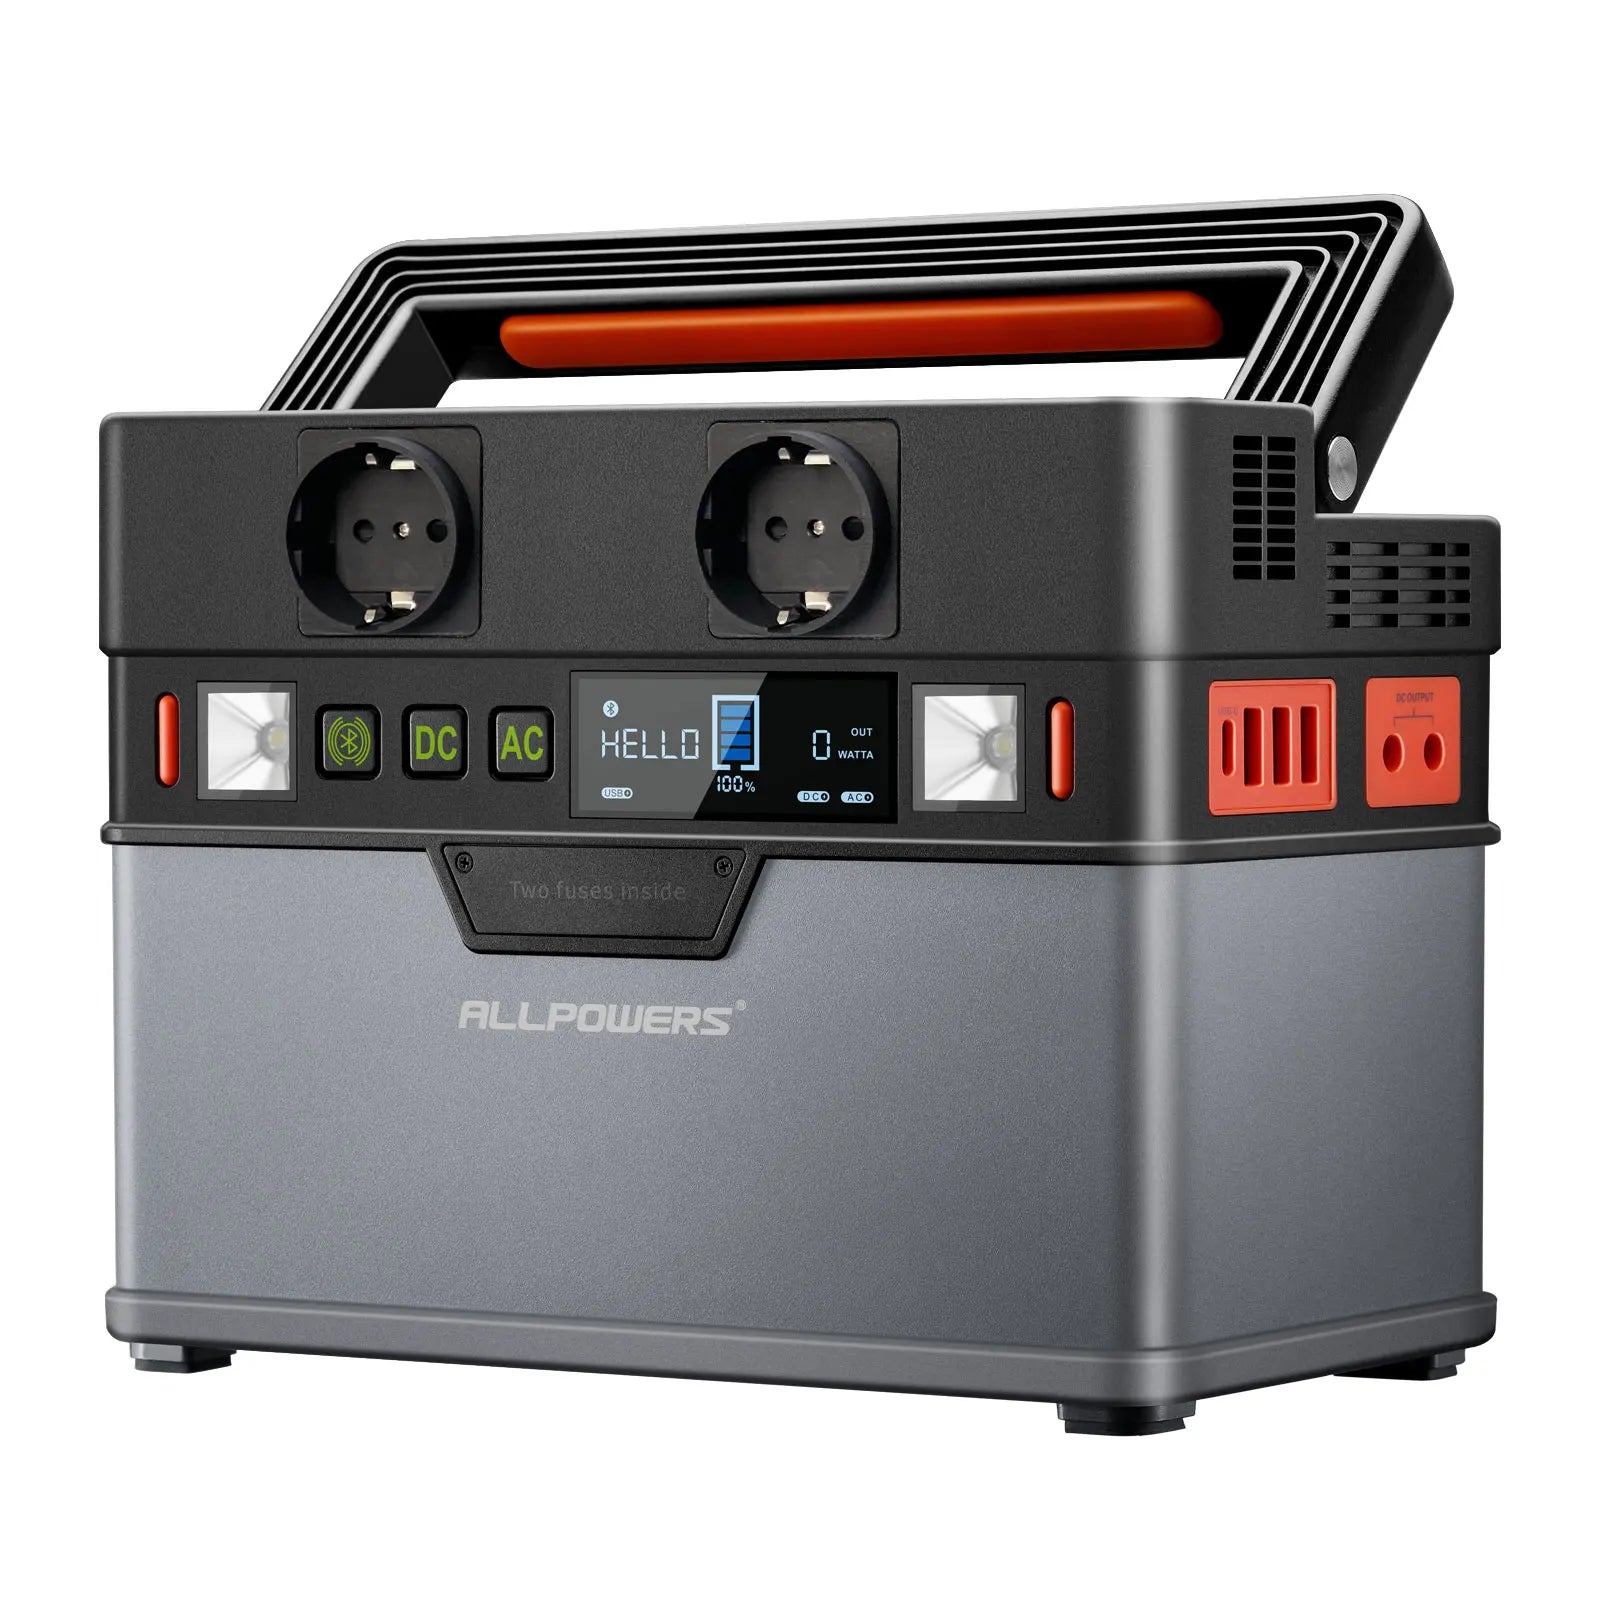 Portable solar generator with high-efficiency charging and multiple output options.